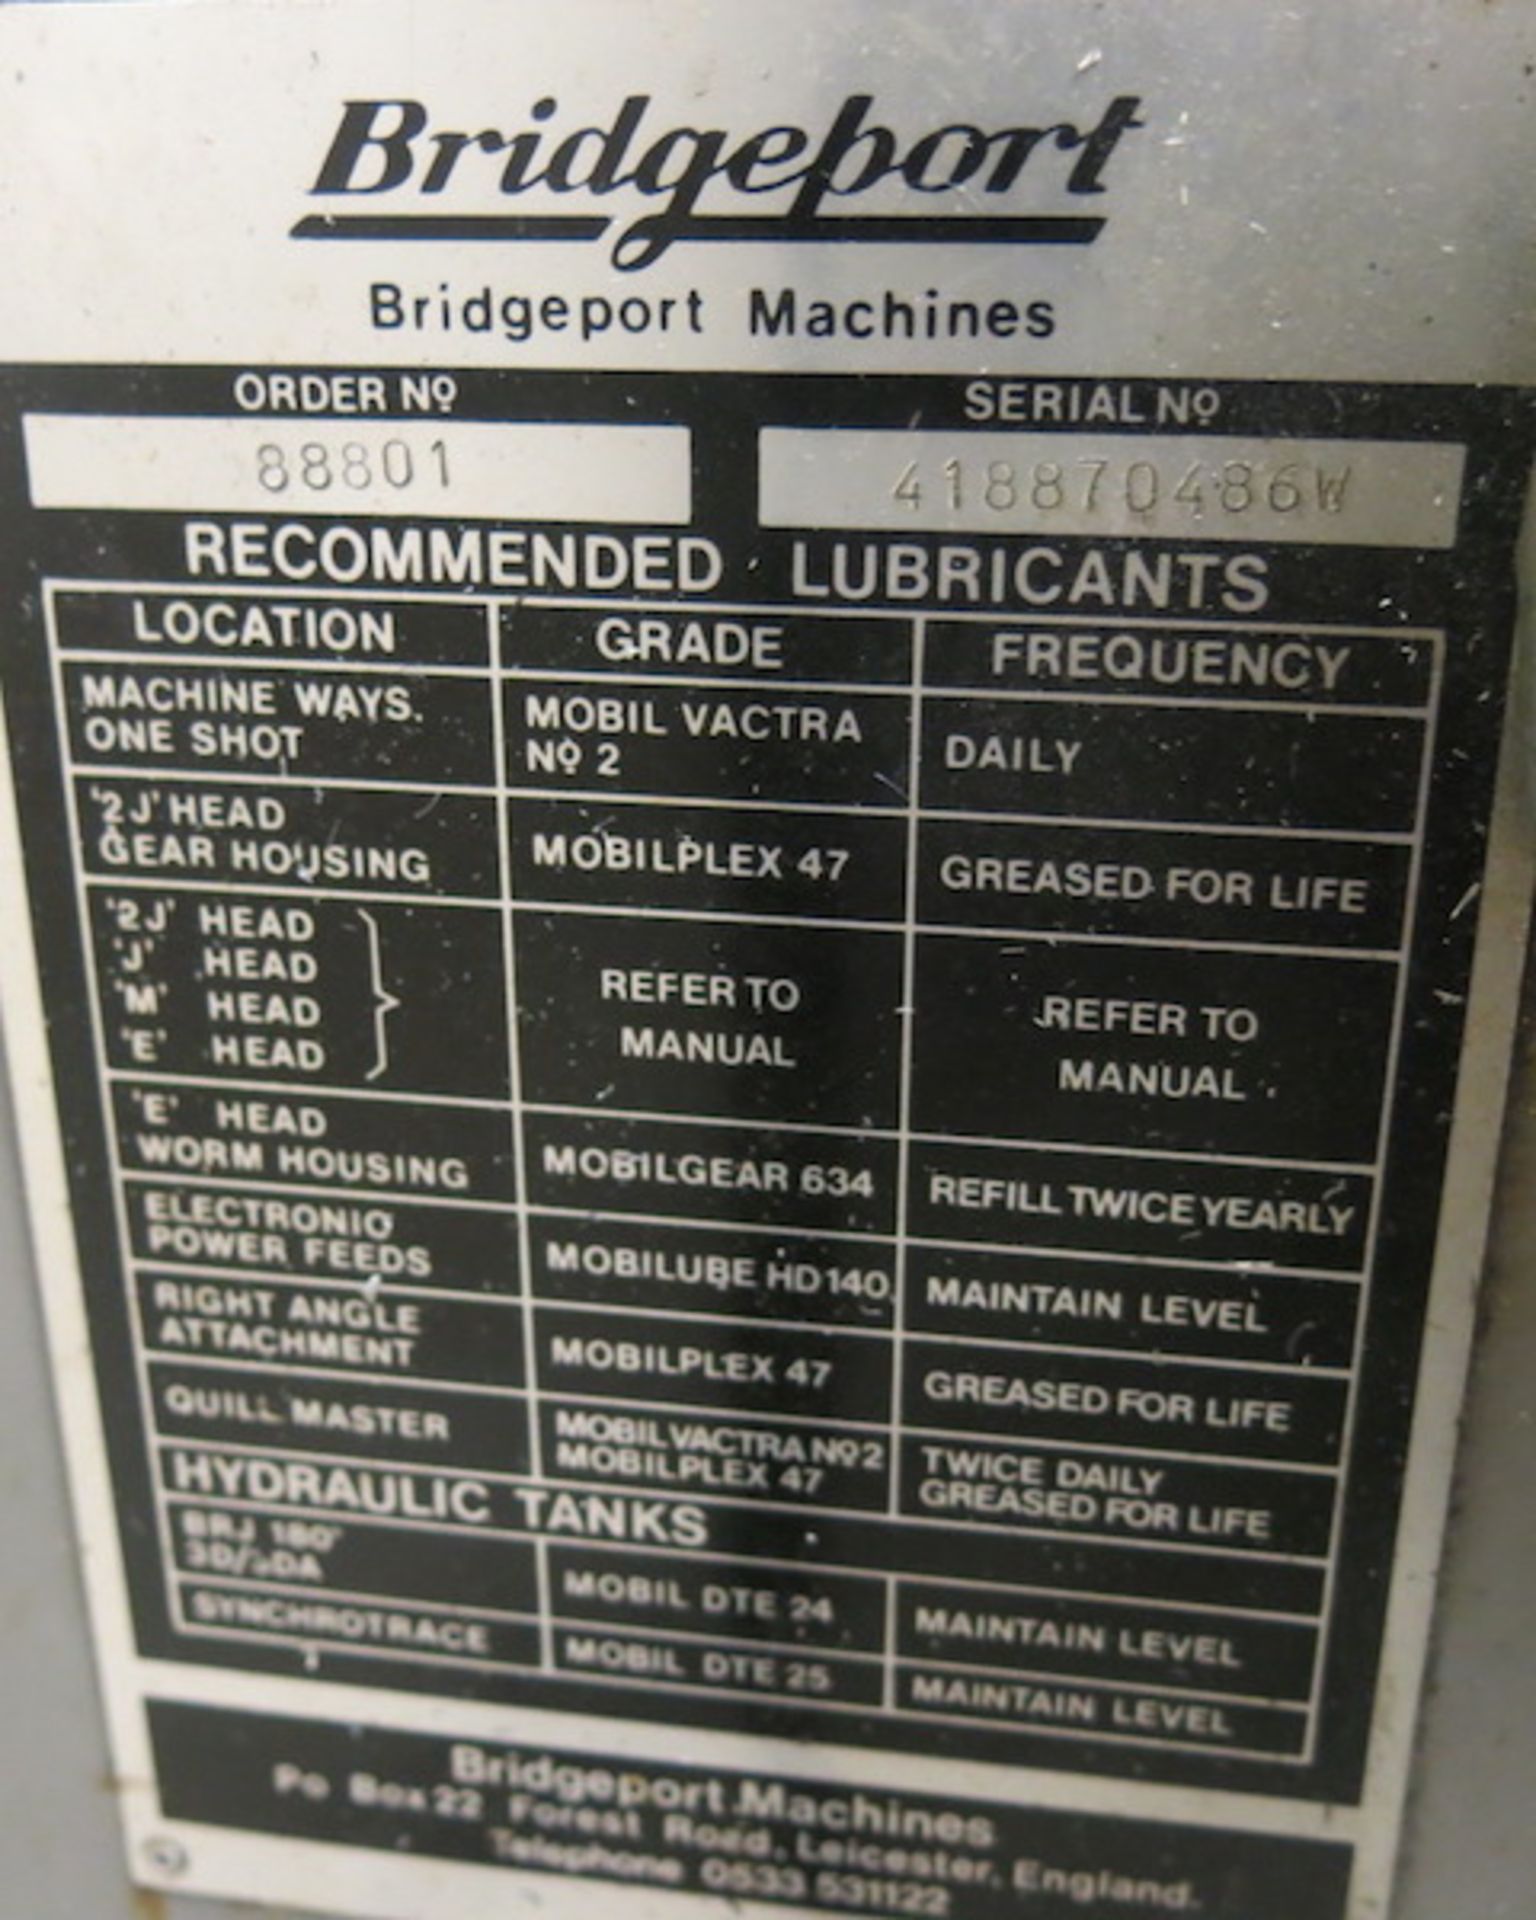 Bridgeport Universal Milling Machine, 42" x 9" Table, S/N 418870486W. Complete with Machine Vice, - Image 3 of 15